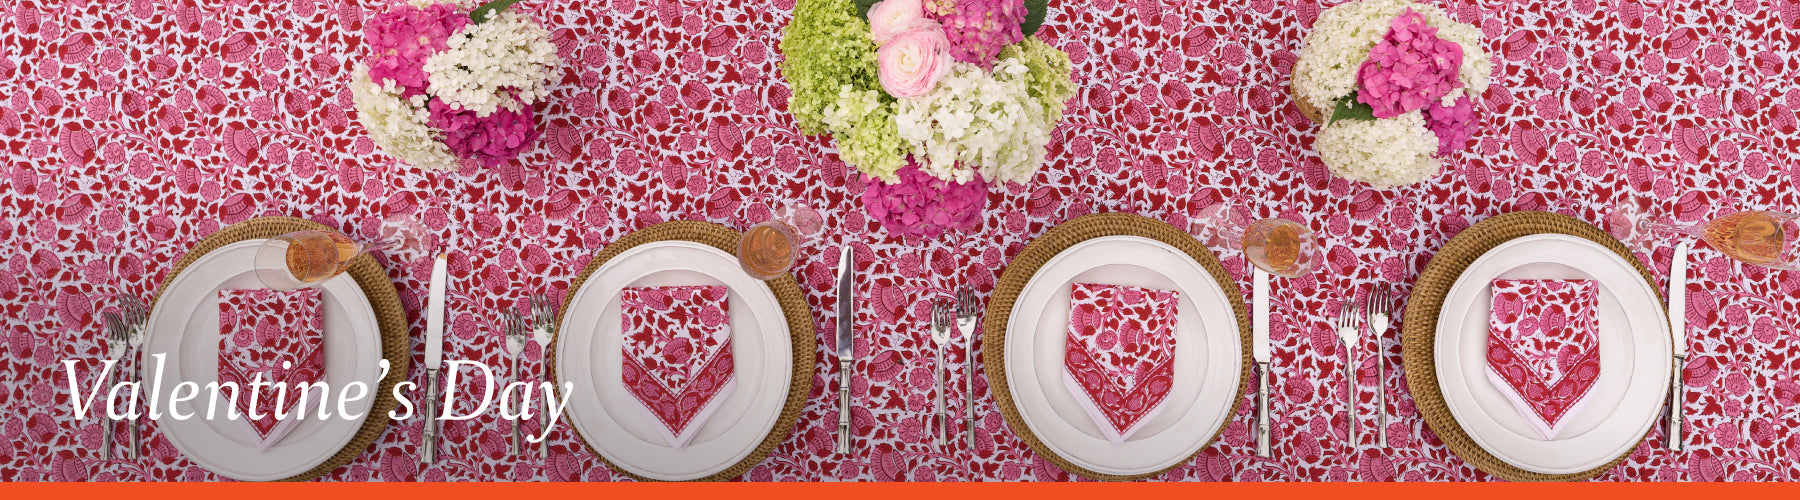 Valentine TableclothLove Print Round Table LinenFebruary 14